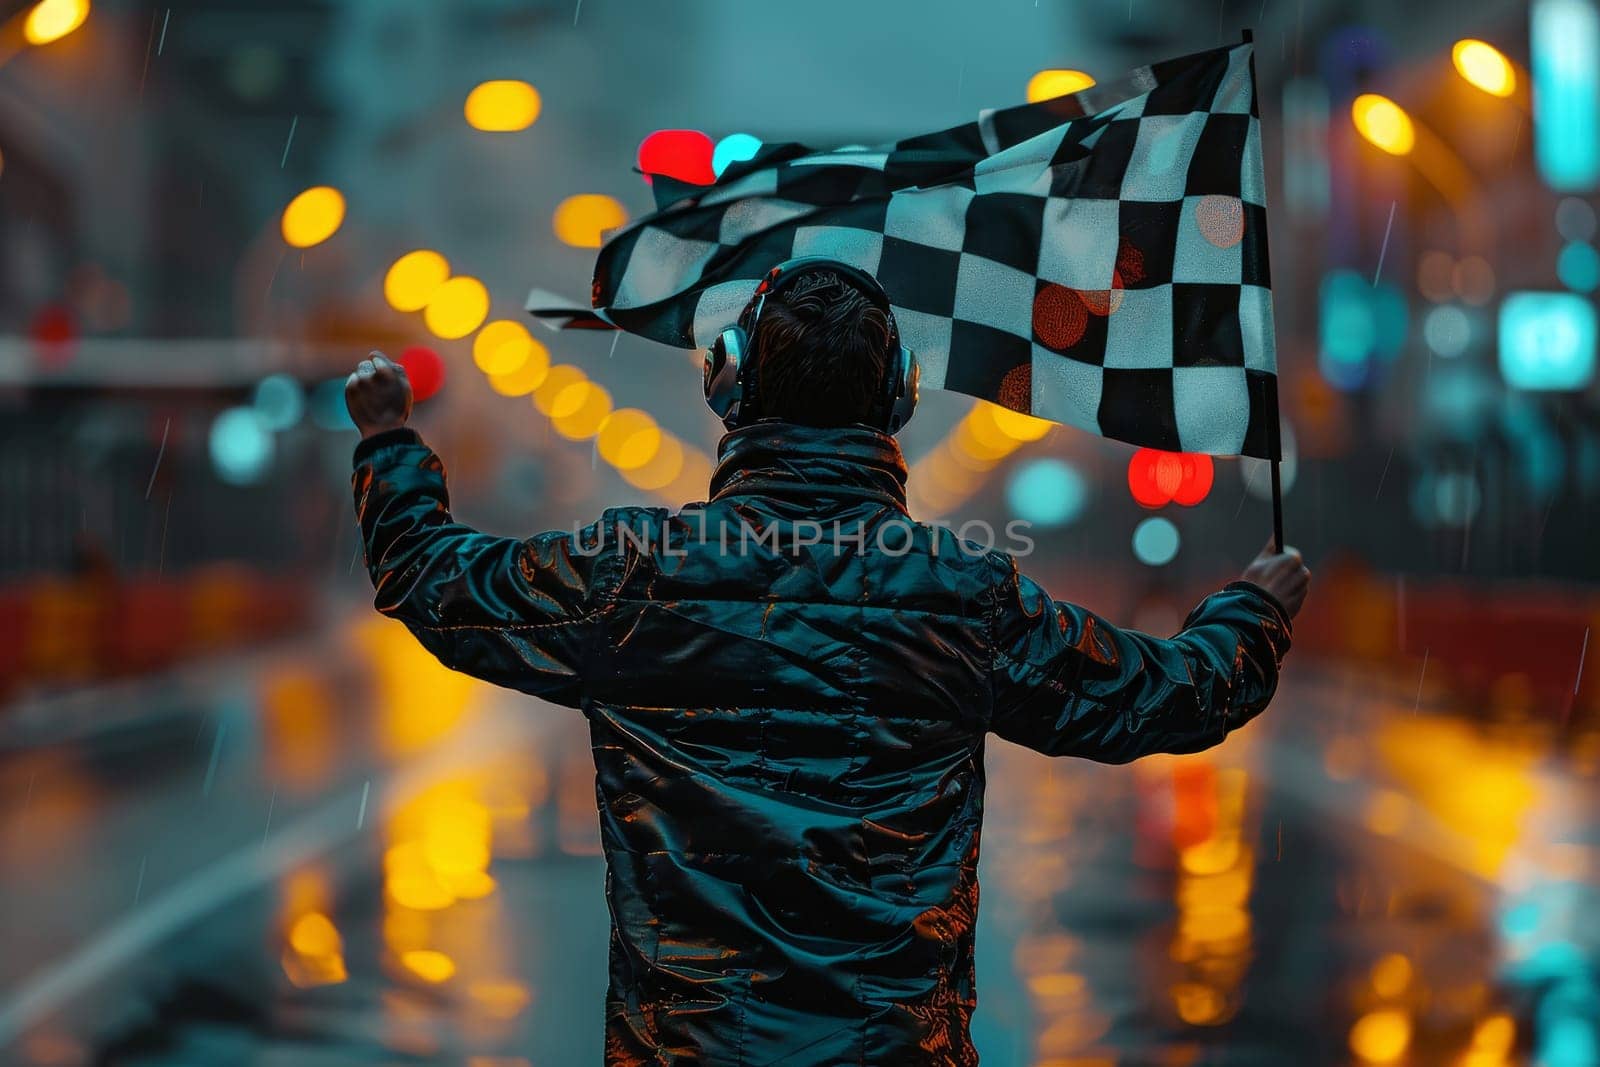 A man holding a checkered flag in a race track. The image has a mood of excitement and anticipation